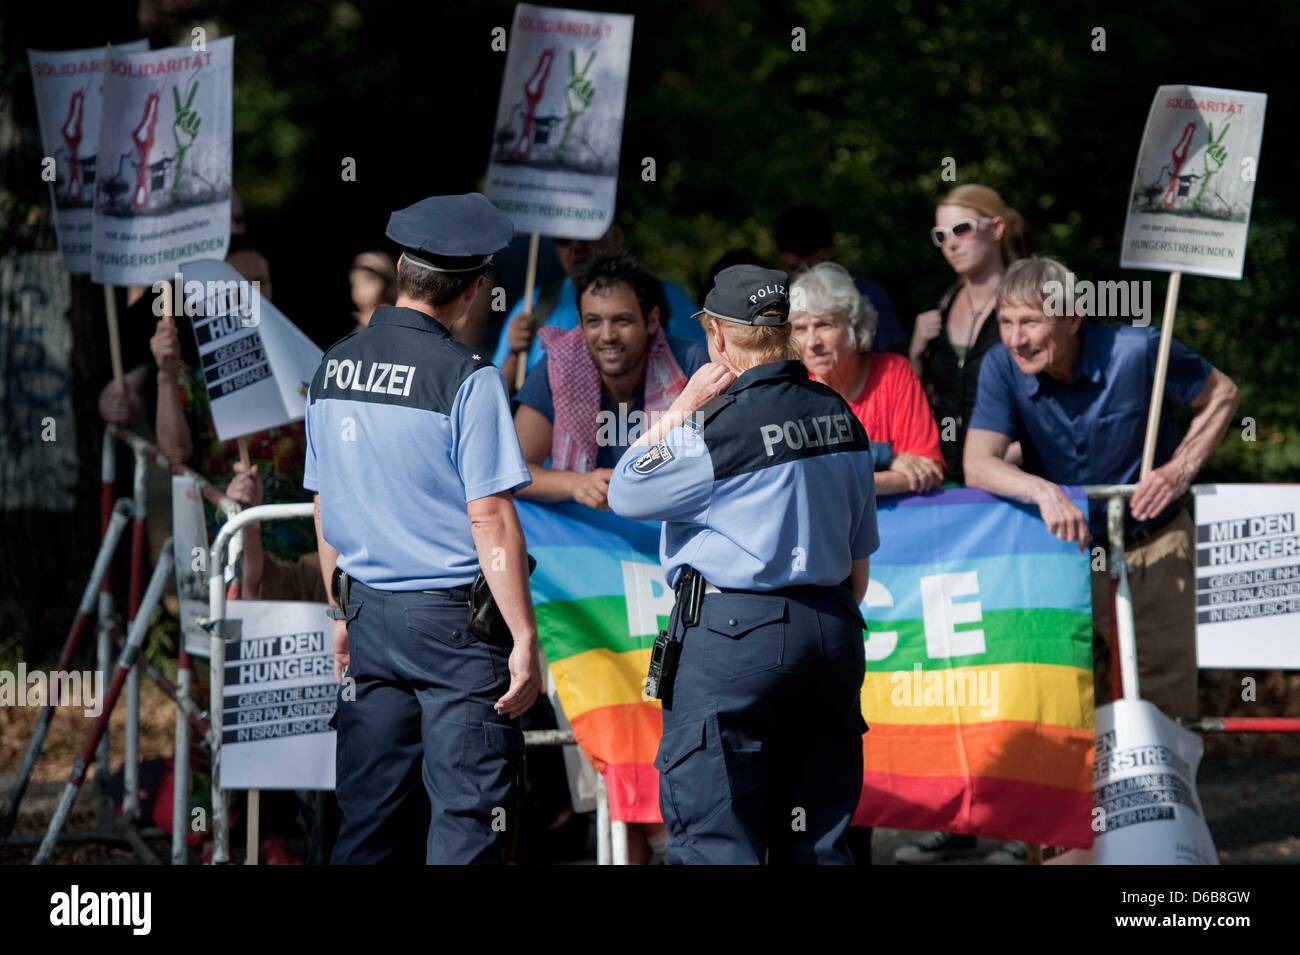 Two police officers watch a group of protesters with banners in front of the Israeli embassy in Berlin, Germany, 23 August 2012. The demonstration organised by 'Addameer' is aimed against alleged abuses of Palestinian prisoners in Israeli prisoners. Photo: ROBERT SCHLESINGER Stock Photo